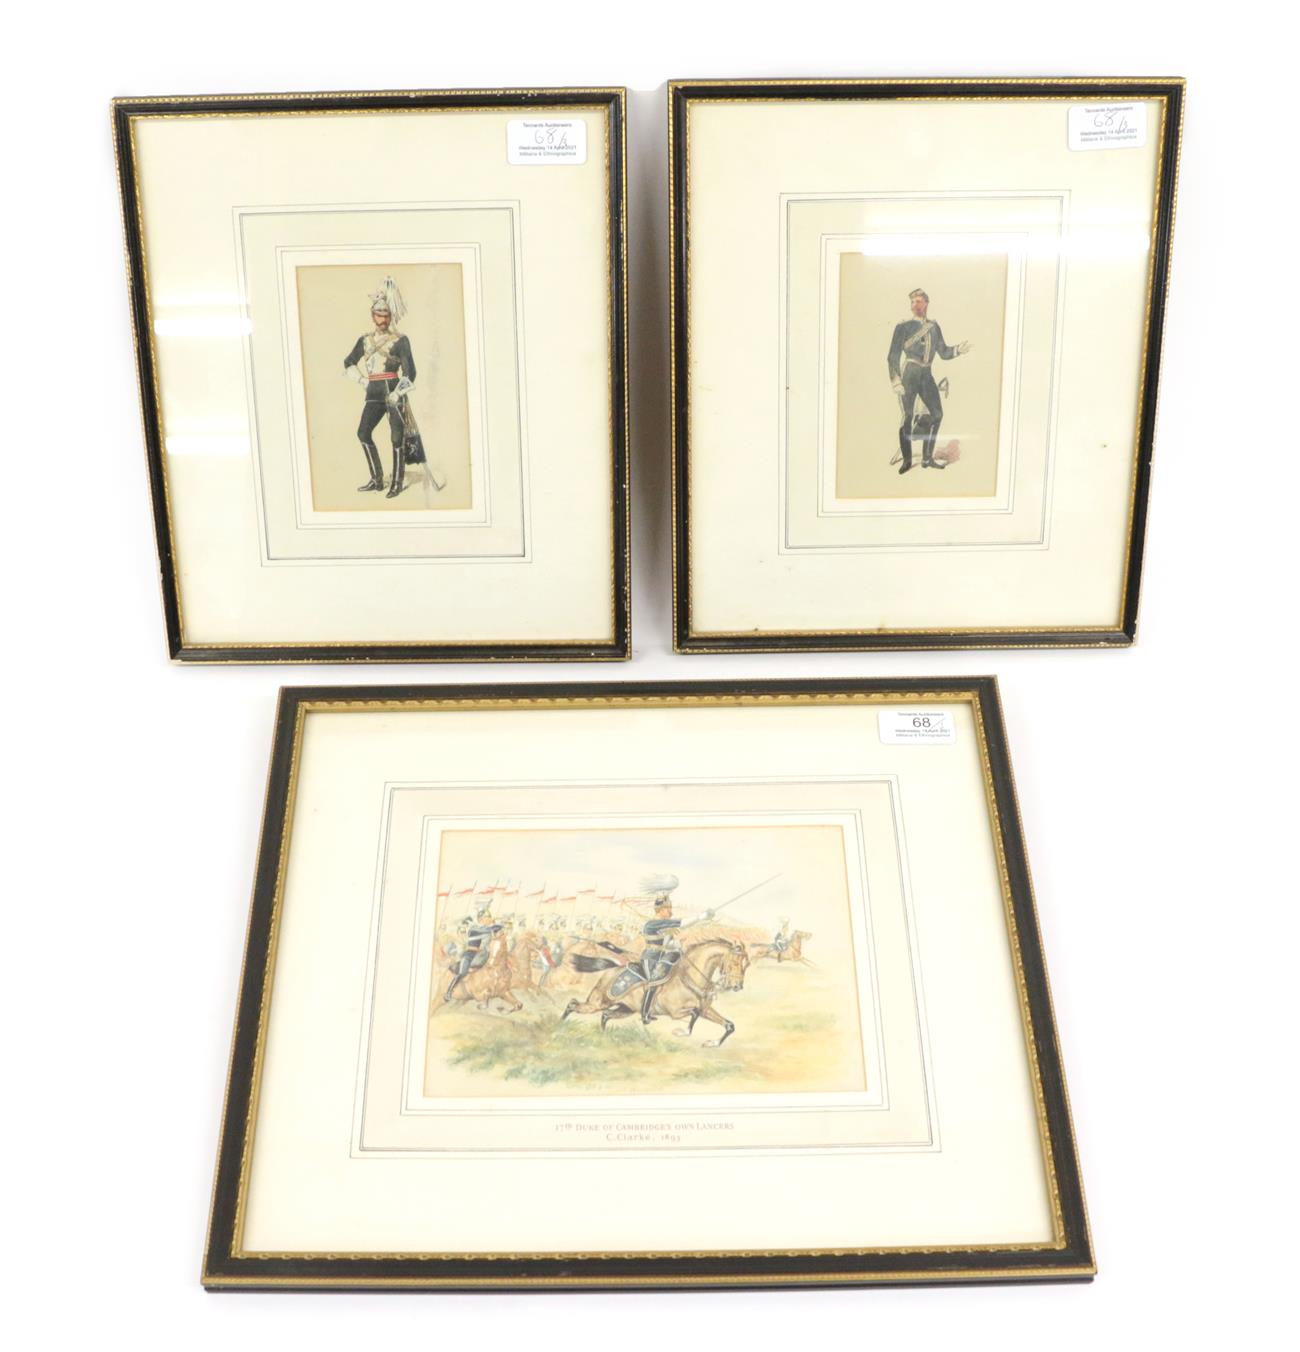 C Clarke - 17th Duke of Cambridge's Own Lancers, signed and dated (18)95, watercolour, 14cm by 19.